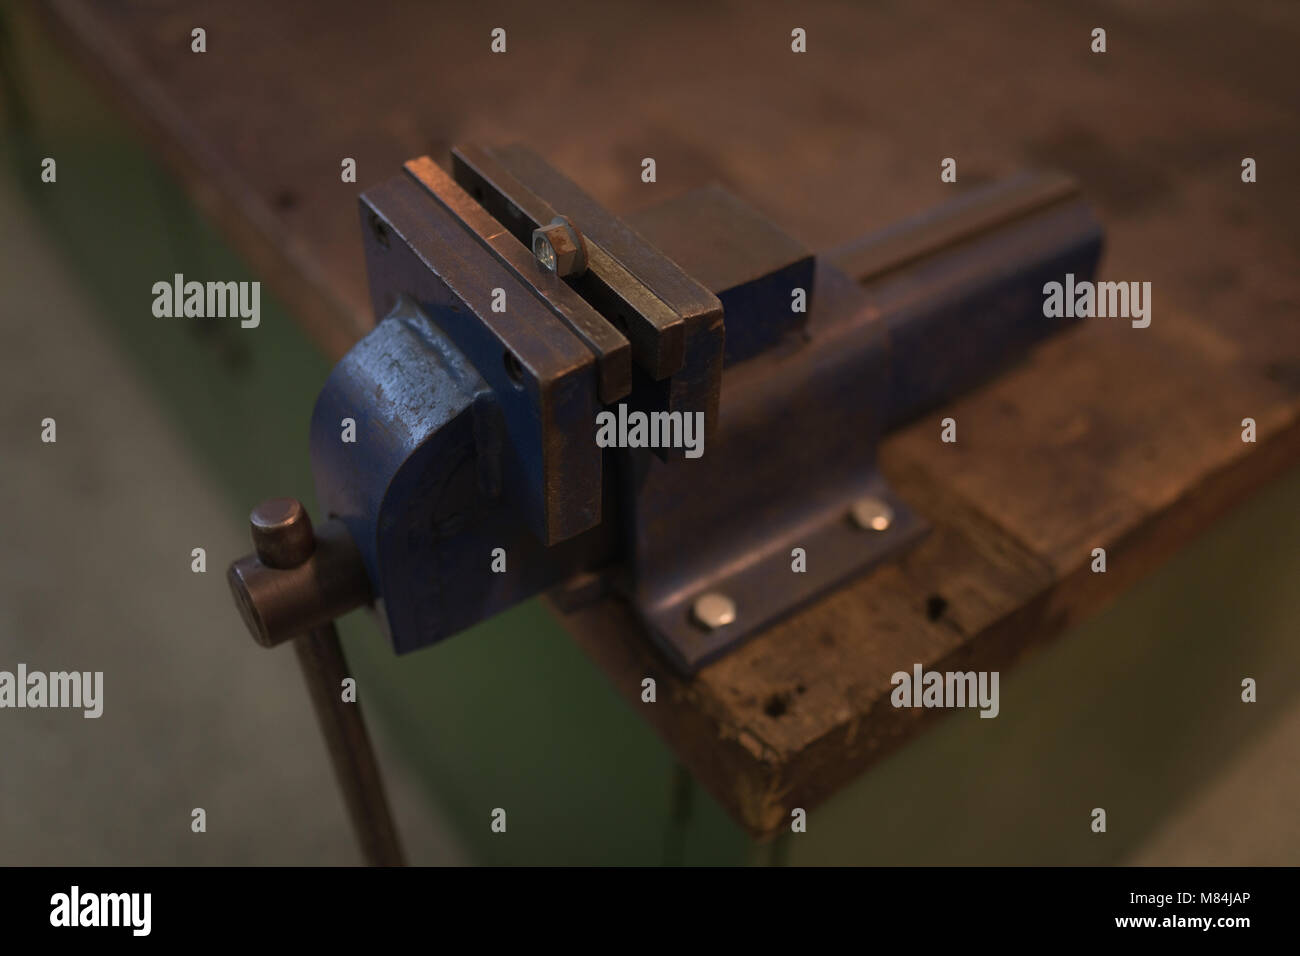 Vise tool on a wooden table Stock Photo